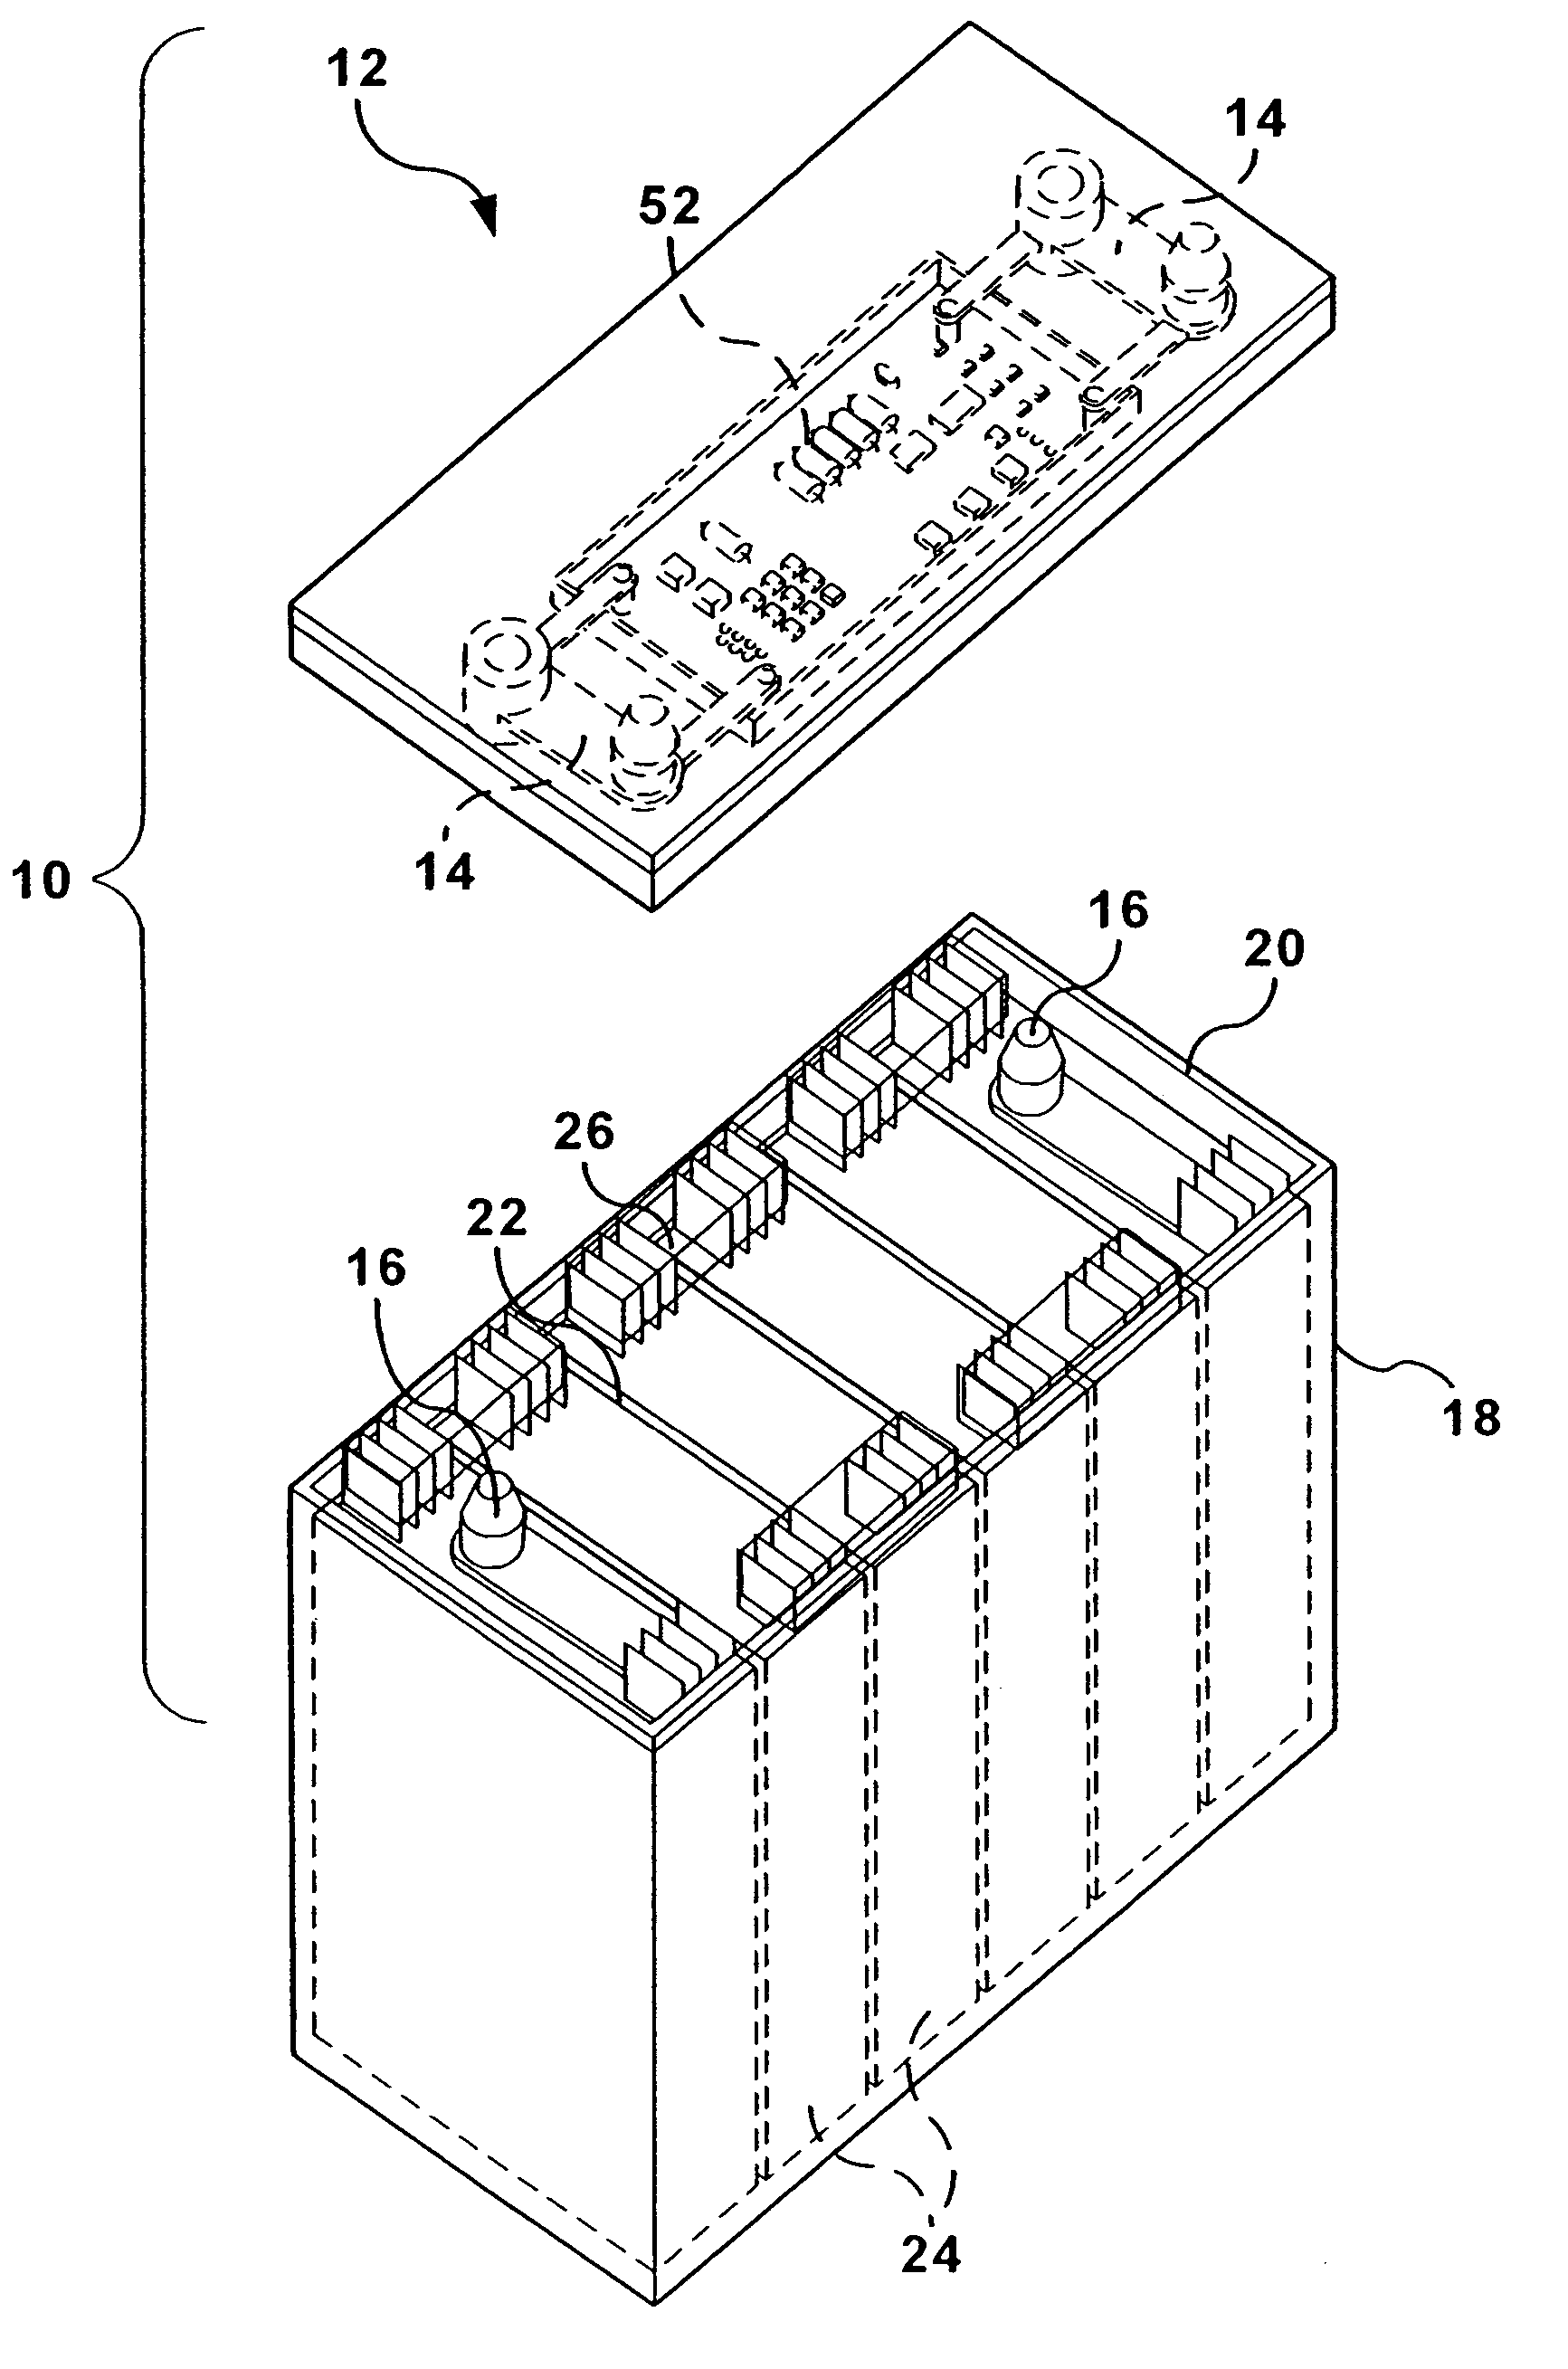 Battery cover assembly having integrated battery condition monitoring